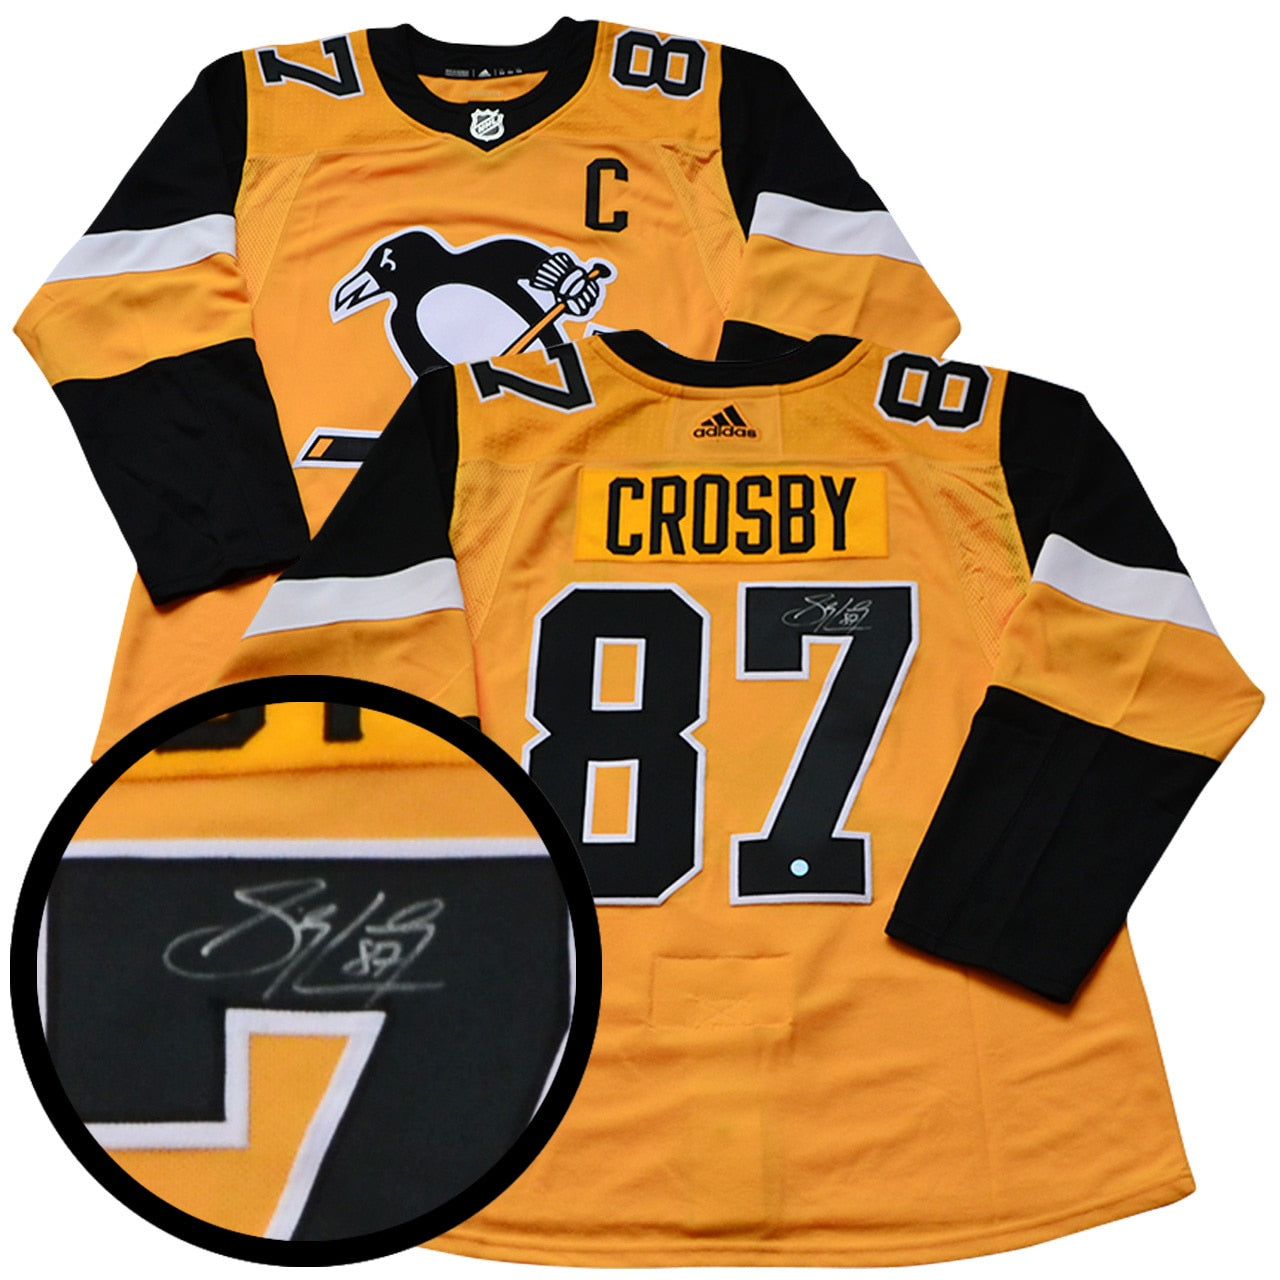 Crosby,S Signed Jersey Penguins Yellow Pro 3rd 2018-2019 Adidas